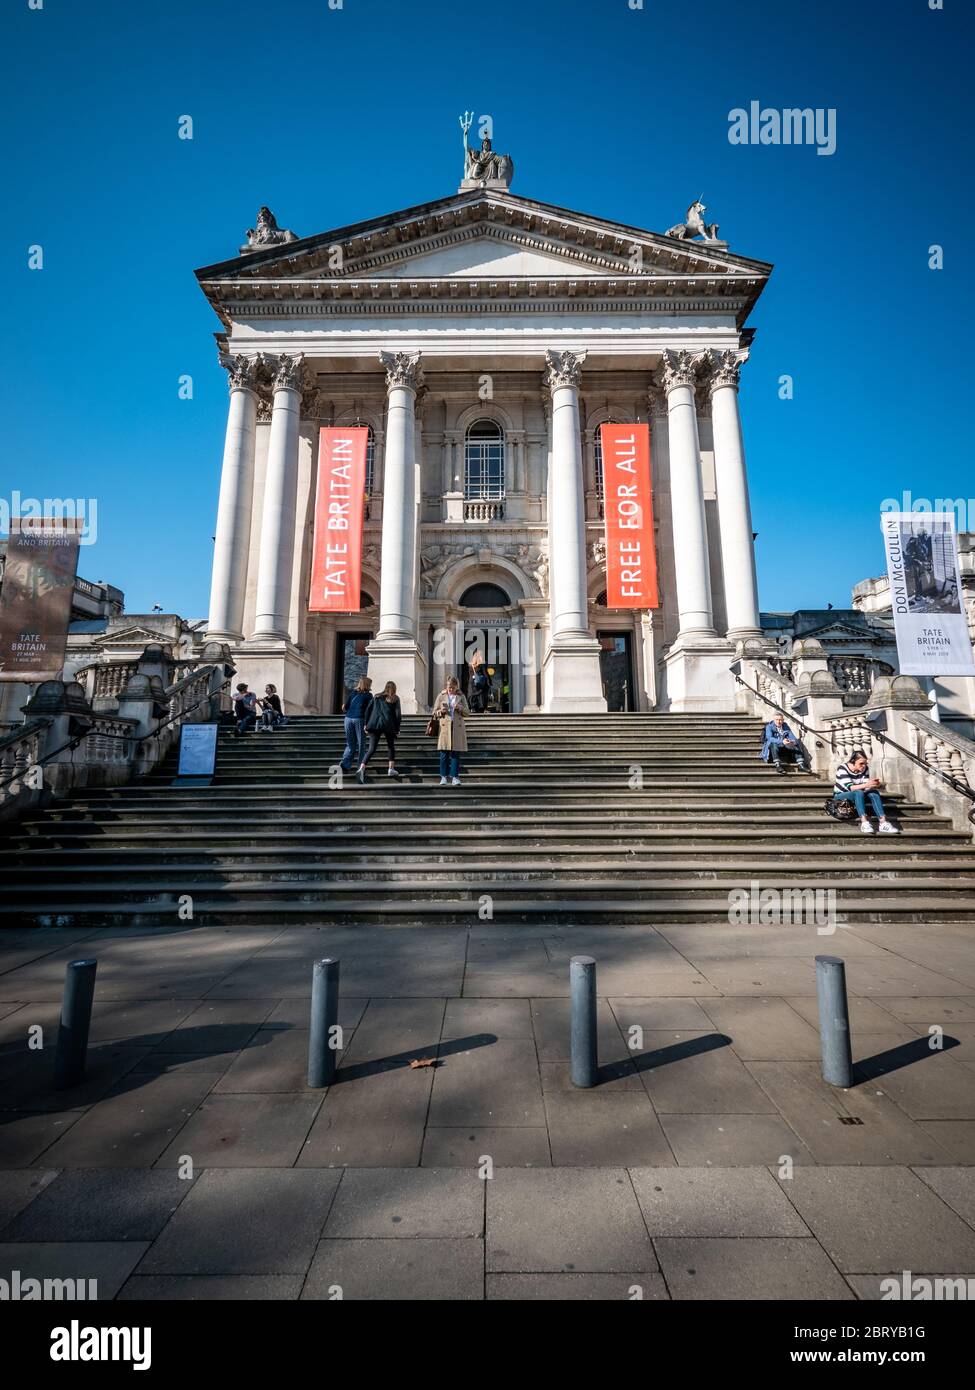 The Tate Britain museum and gallery on Millbank, Westminster, with visitors milling around the entrance and sitting on the stairs. Stock Photo